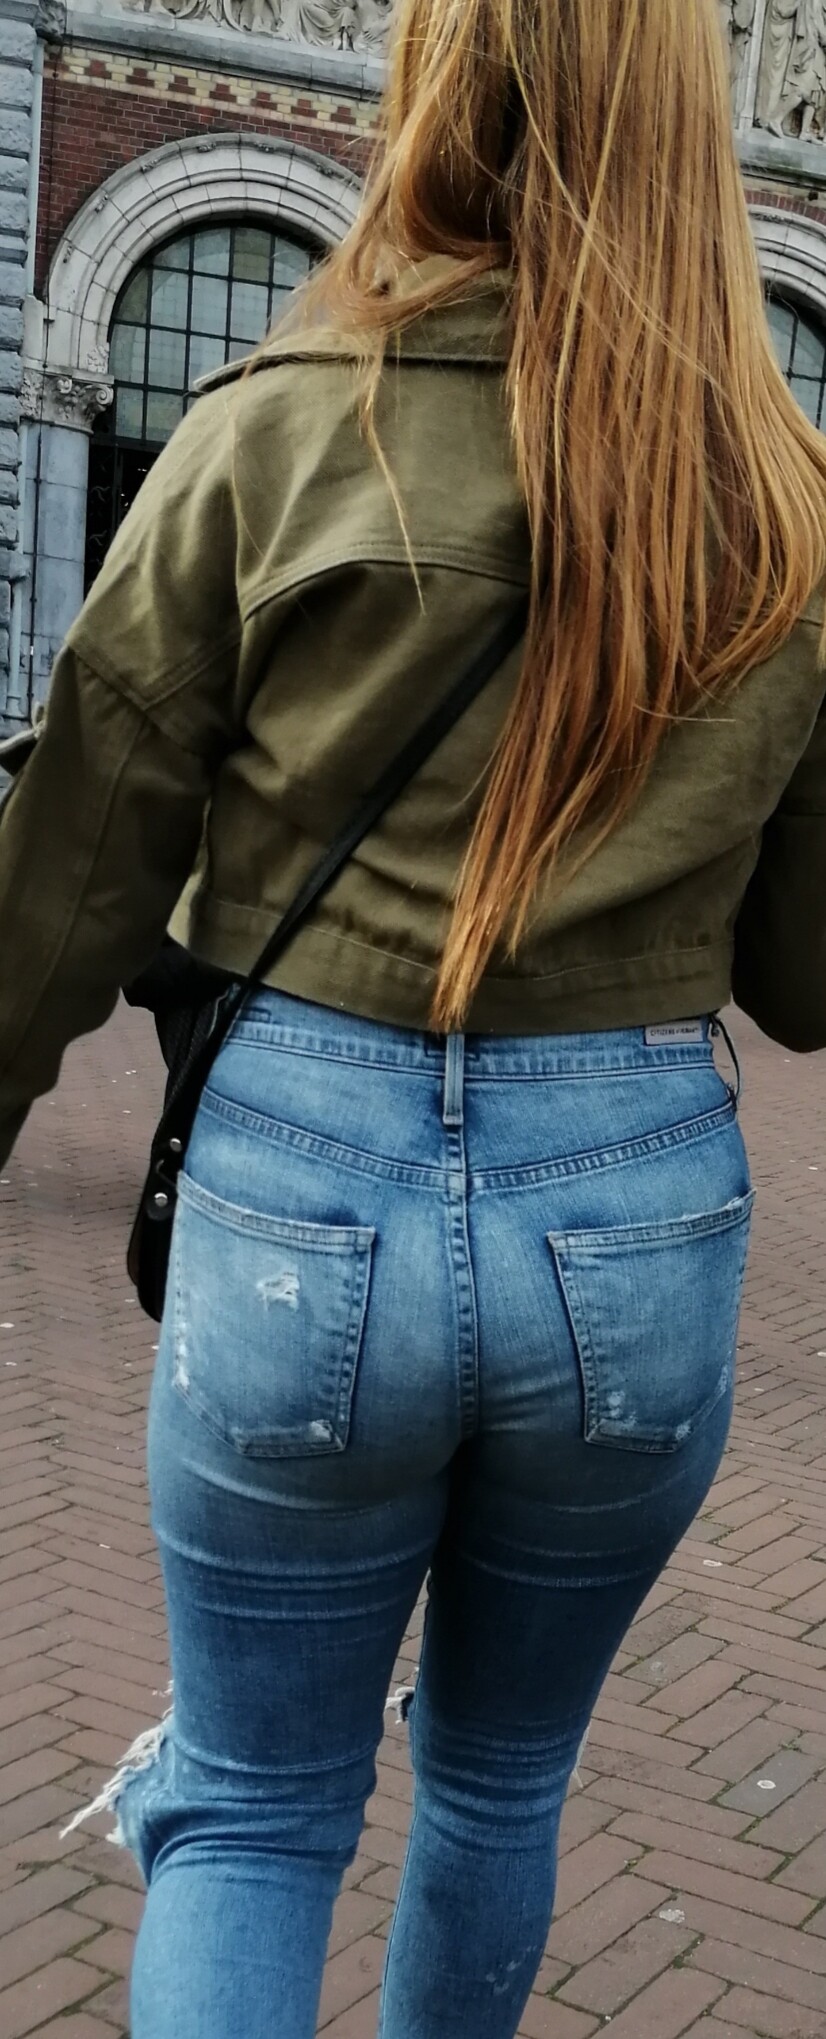 Blonde girl with a good booty in jeans